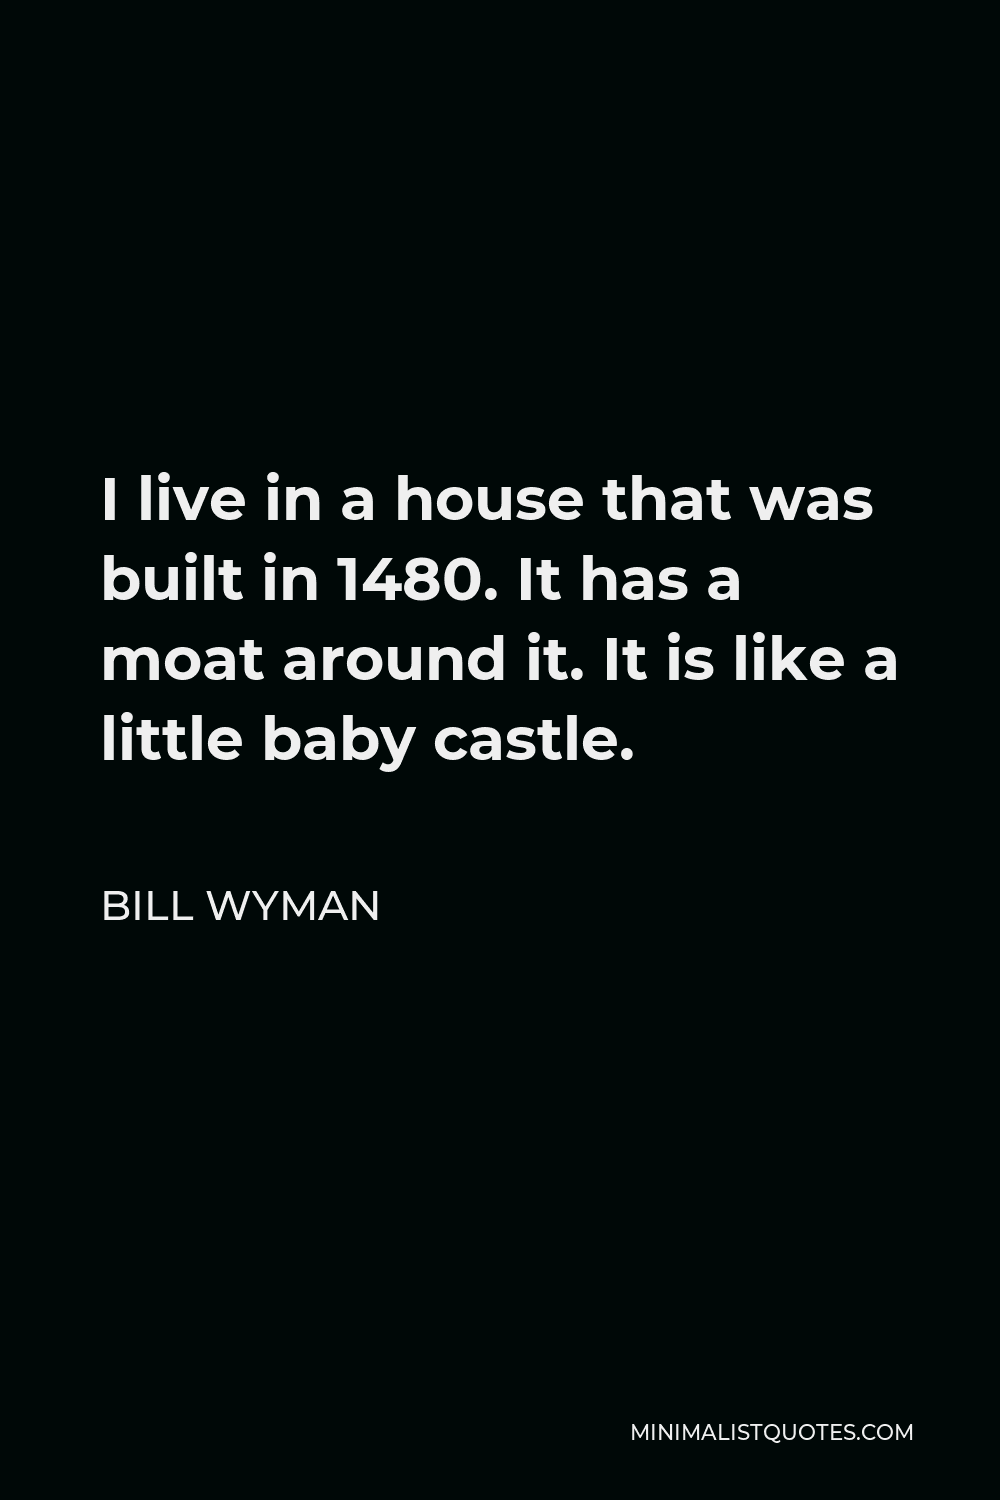 Bill Wyman Quote - I live in a house that was built in 1480. It has a moat around it. It is like a little baby castle.